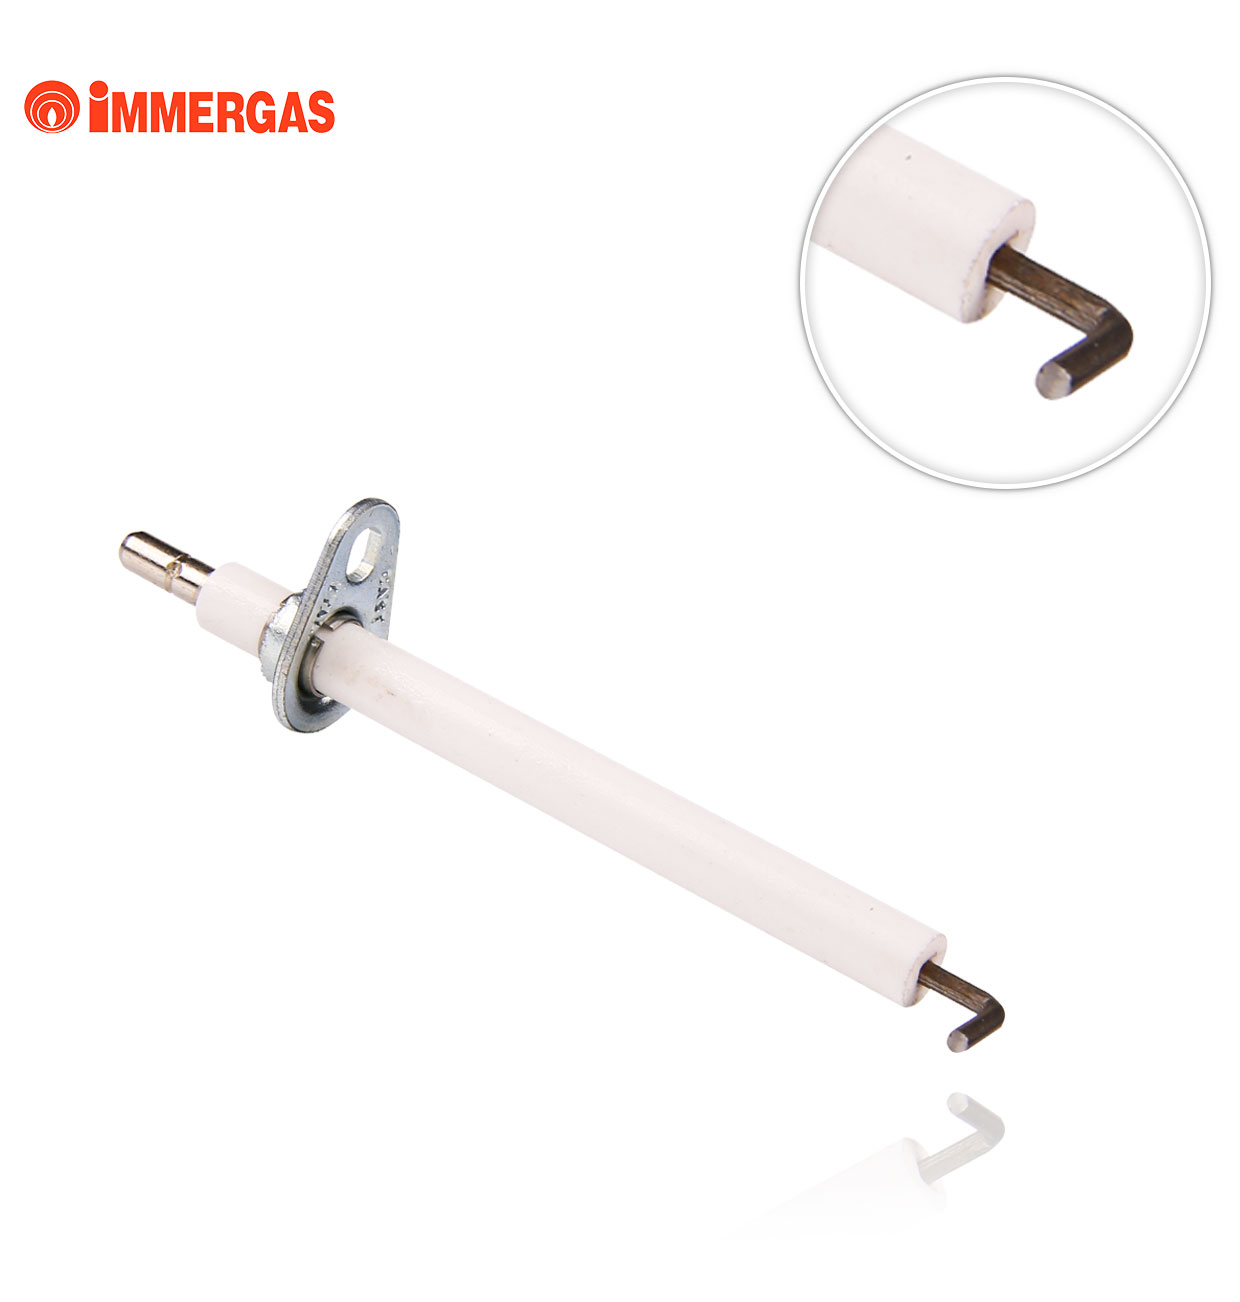 IMMERGAS DX 1025666 ELECTRODE